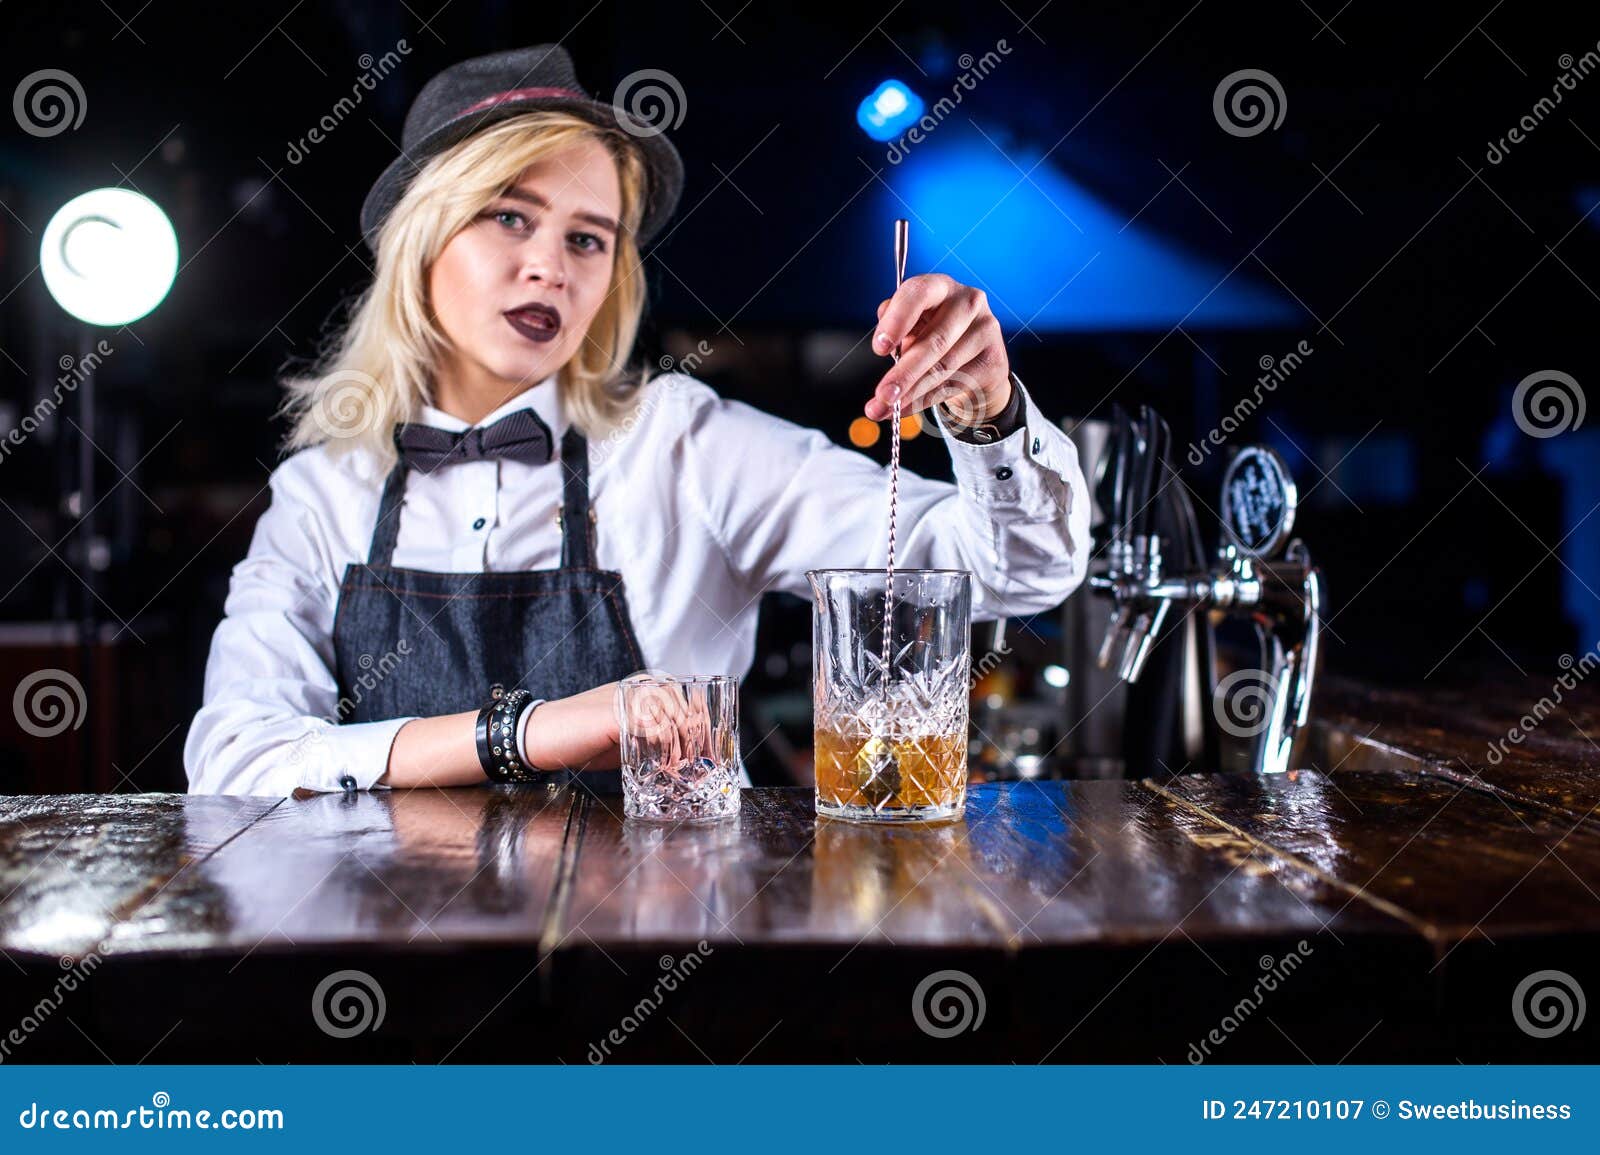 Focused Girl Bartending Pouring Fresh Alcoholic Drink into the Glasses ...